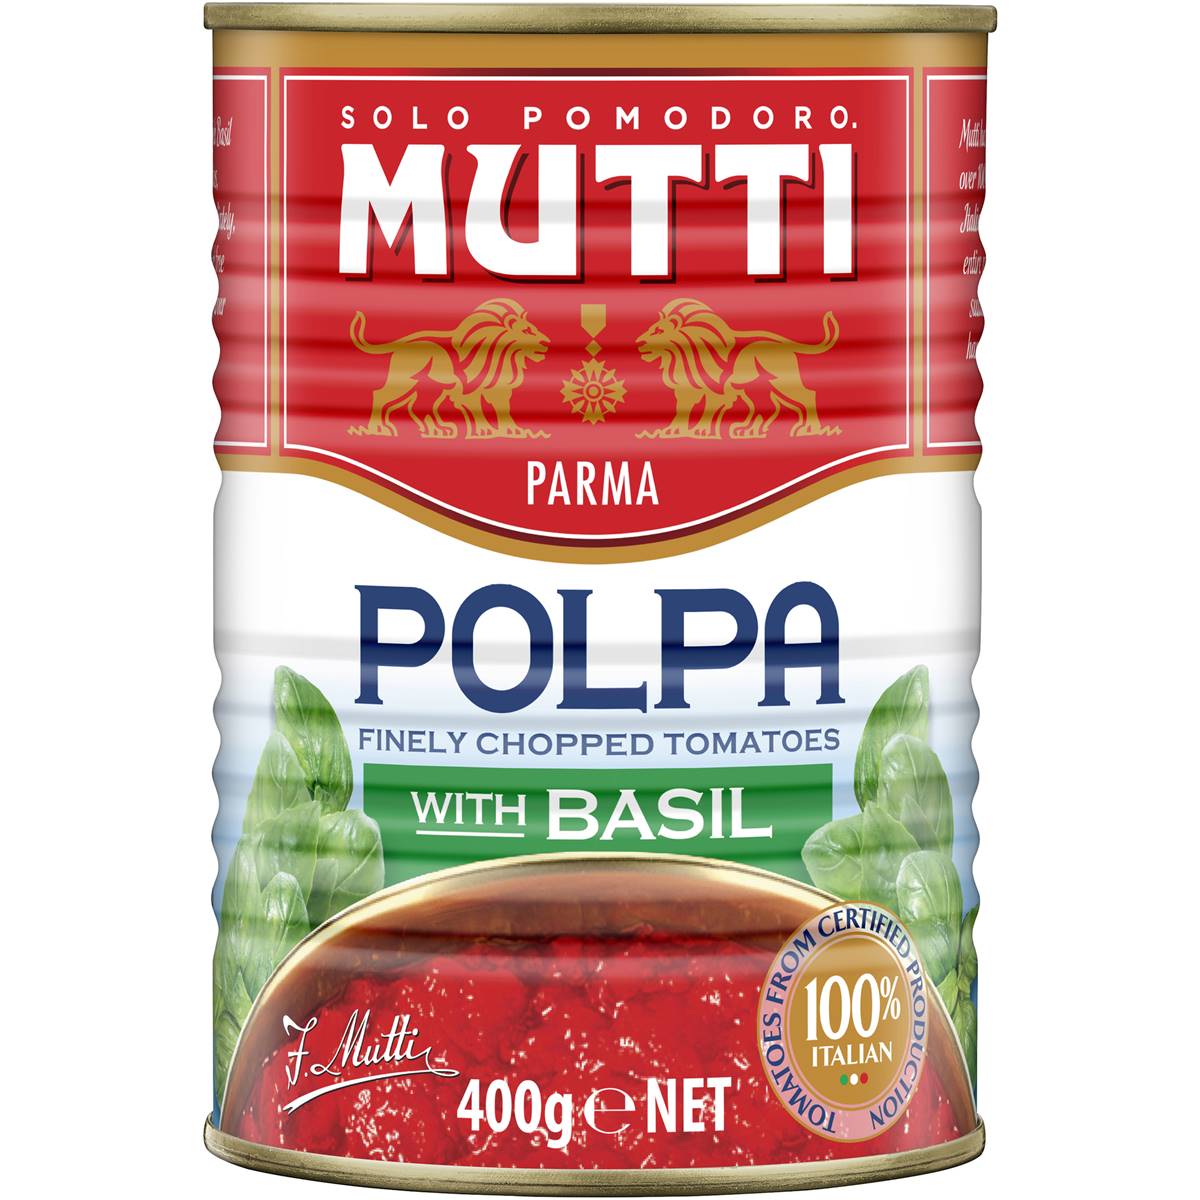 Mutti Parma Polpa Finely Chopped Tomatoes With Basil 400g